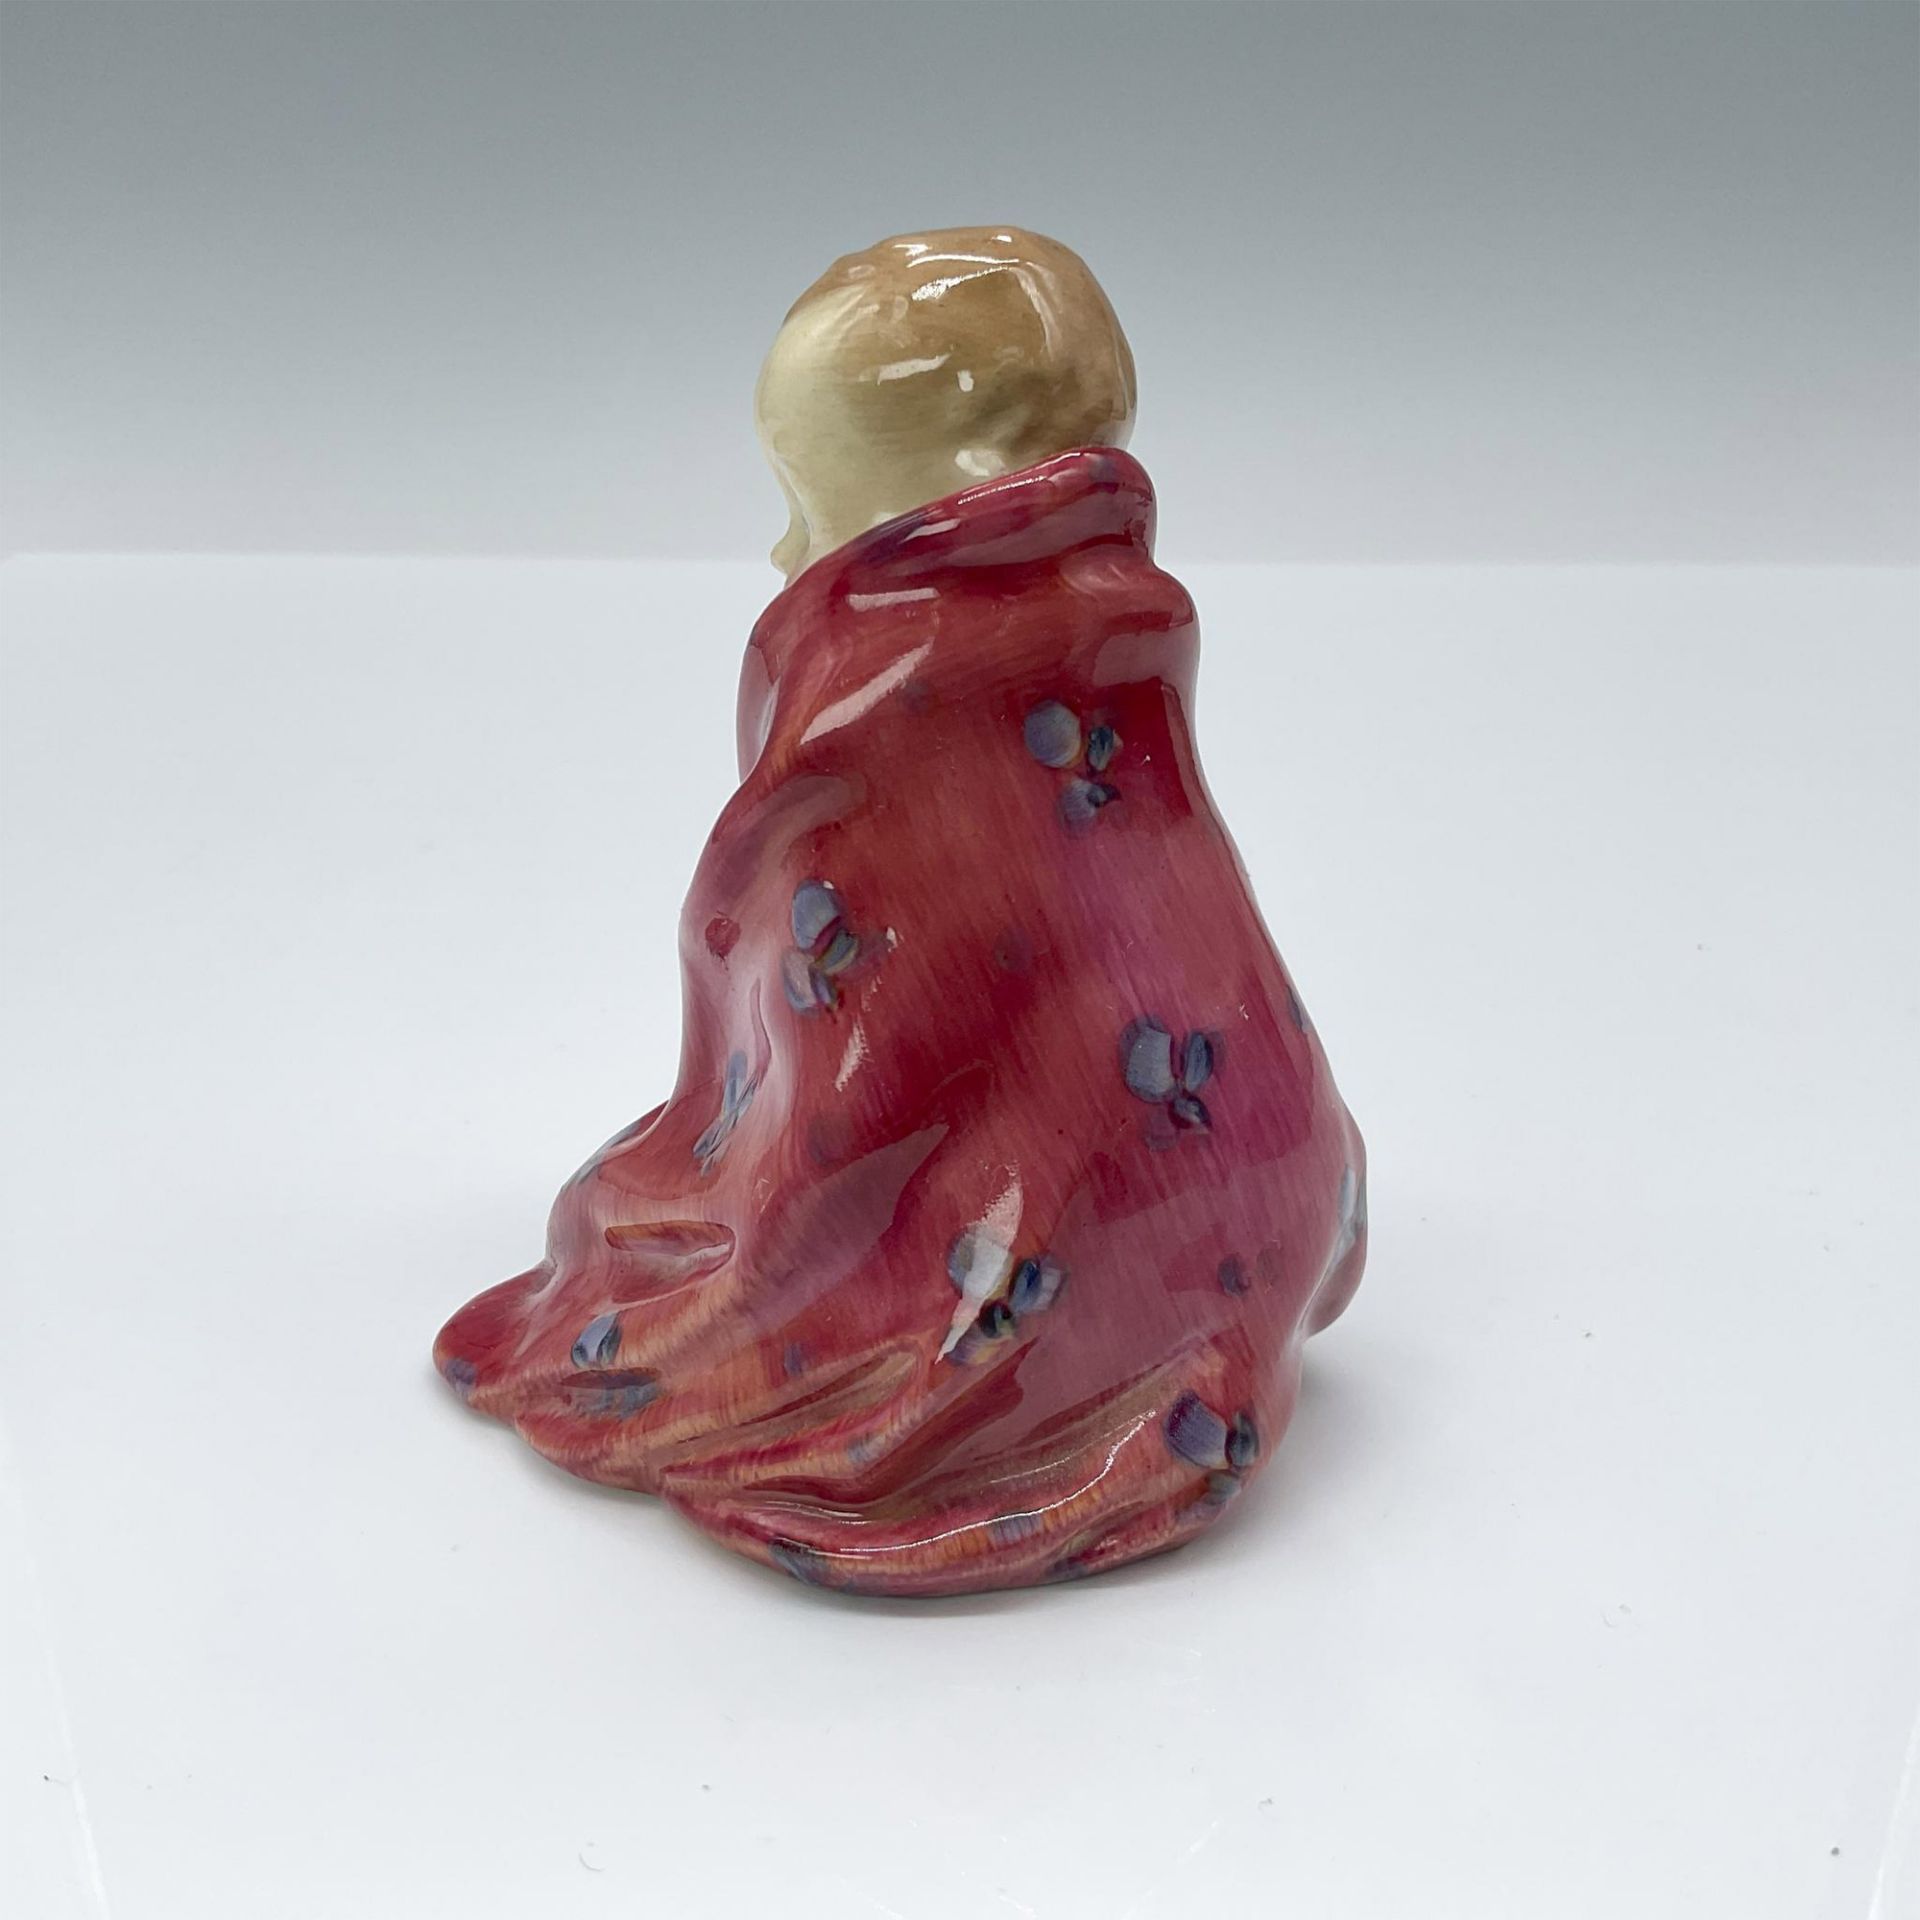 This Little Pig (red) - HN1793 - Royal Doulton Figurine - Image 2 of 3